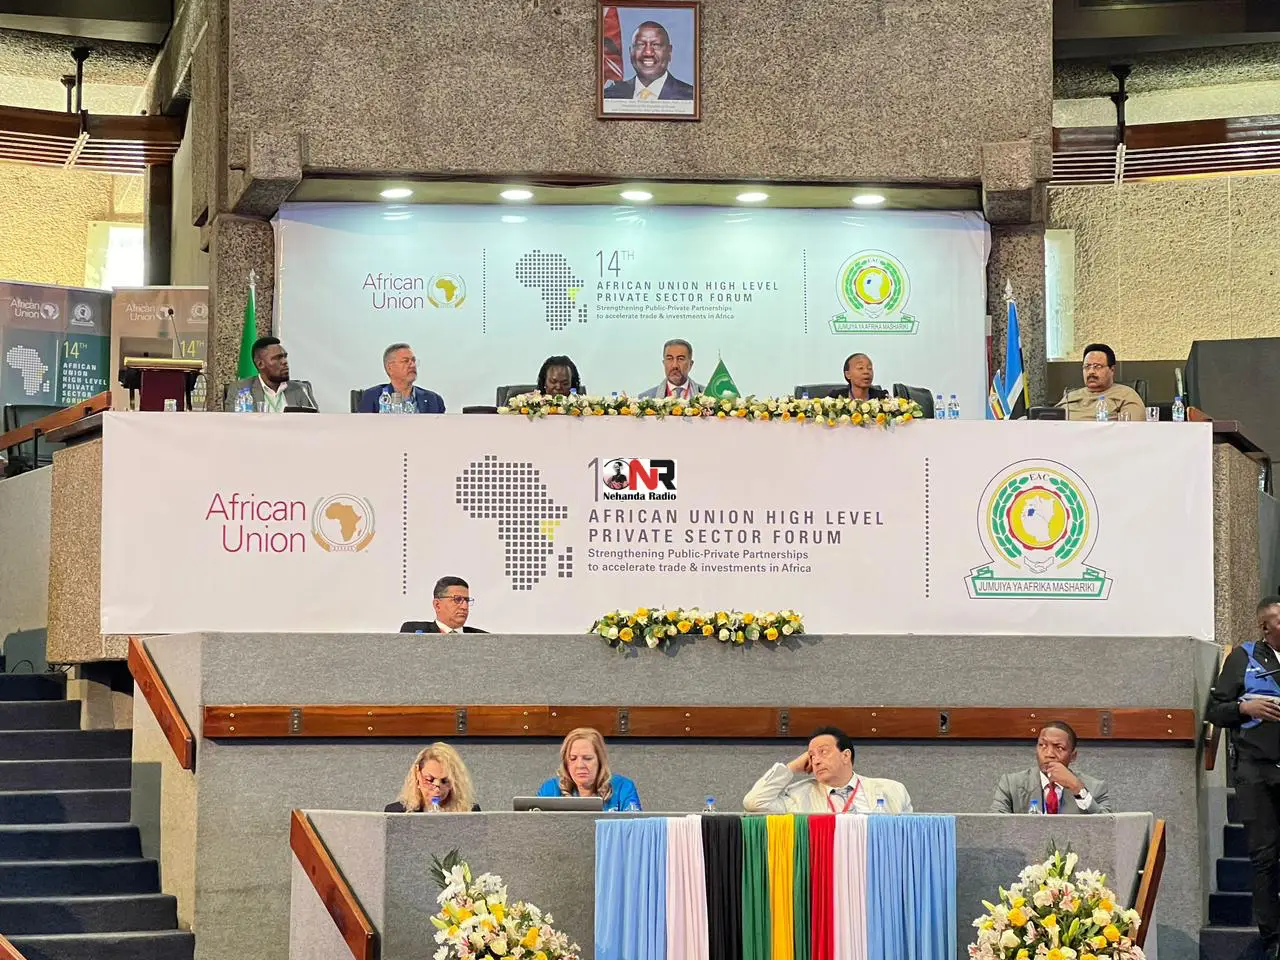 Uebert Angel (bottom right) has been appointed as the African Union's Pan African Parliament Ambassador for Interfaith Dialogue and Humanitarian Affairs.